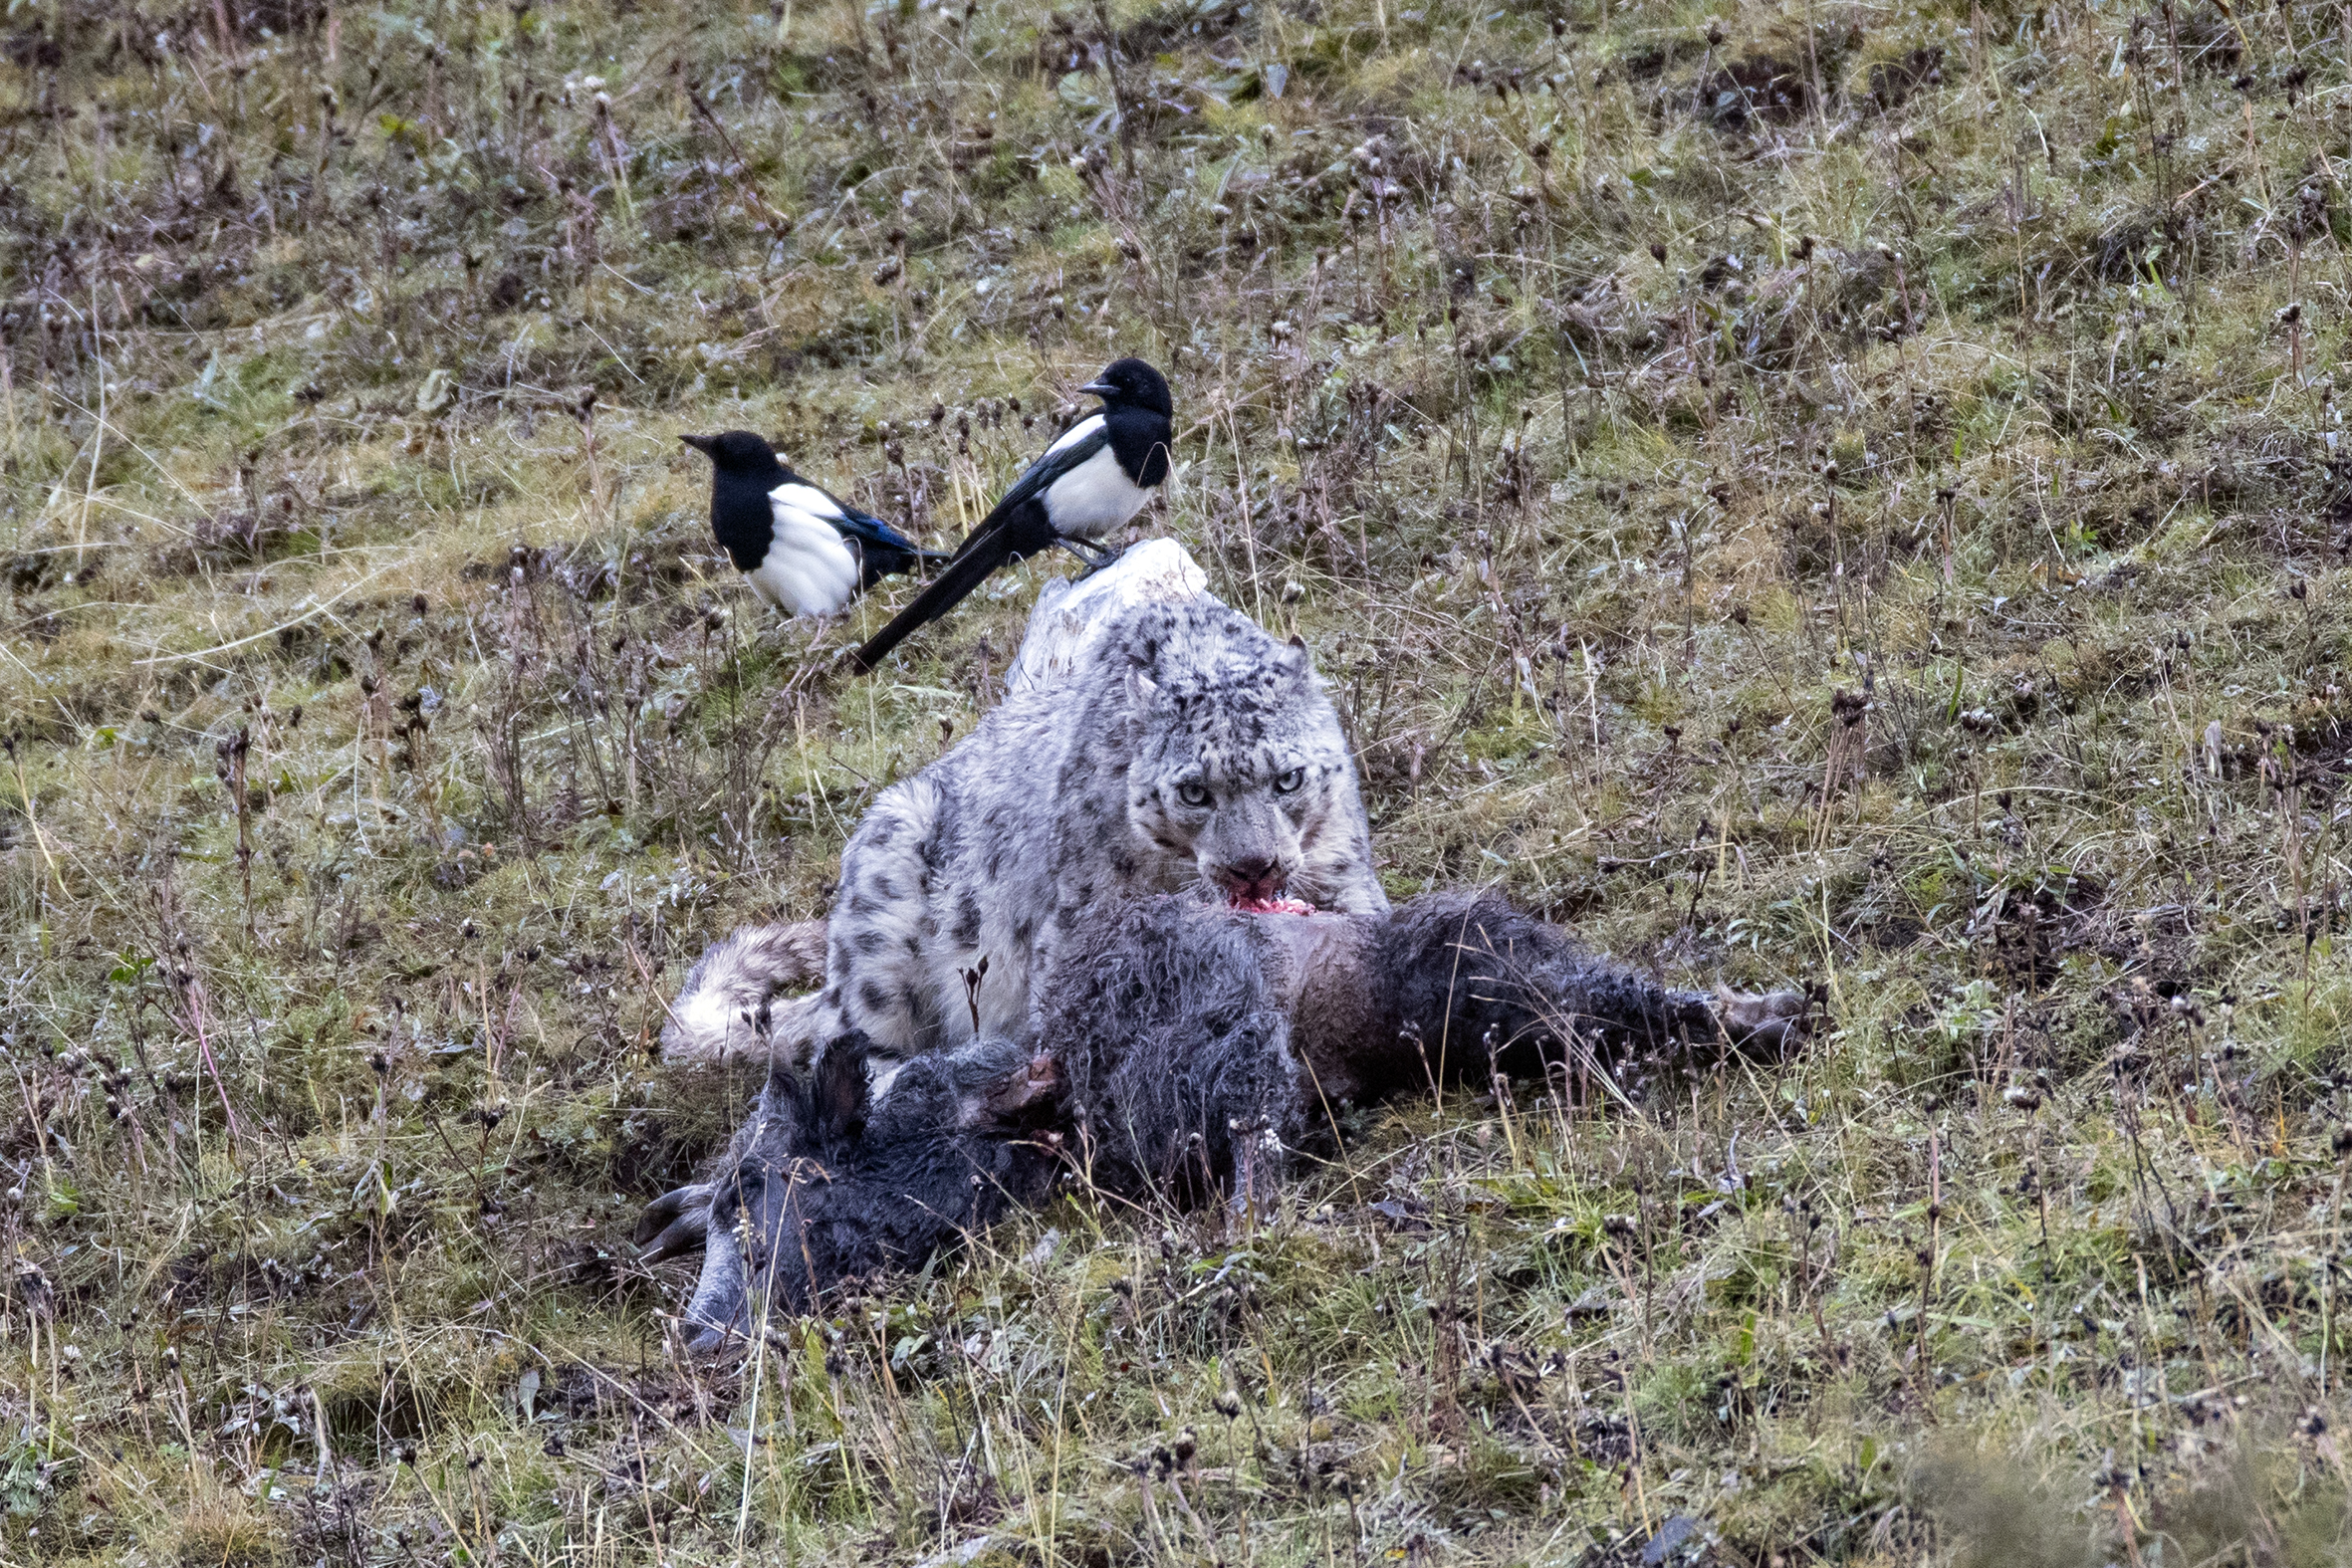 Snow Leopard with Yak kill © Zeng Zhang